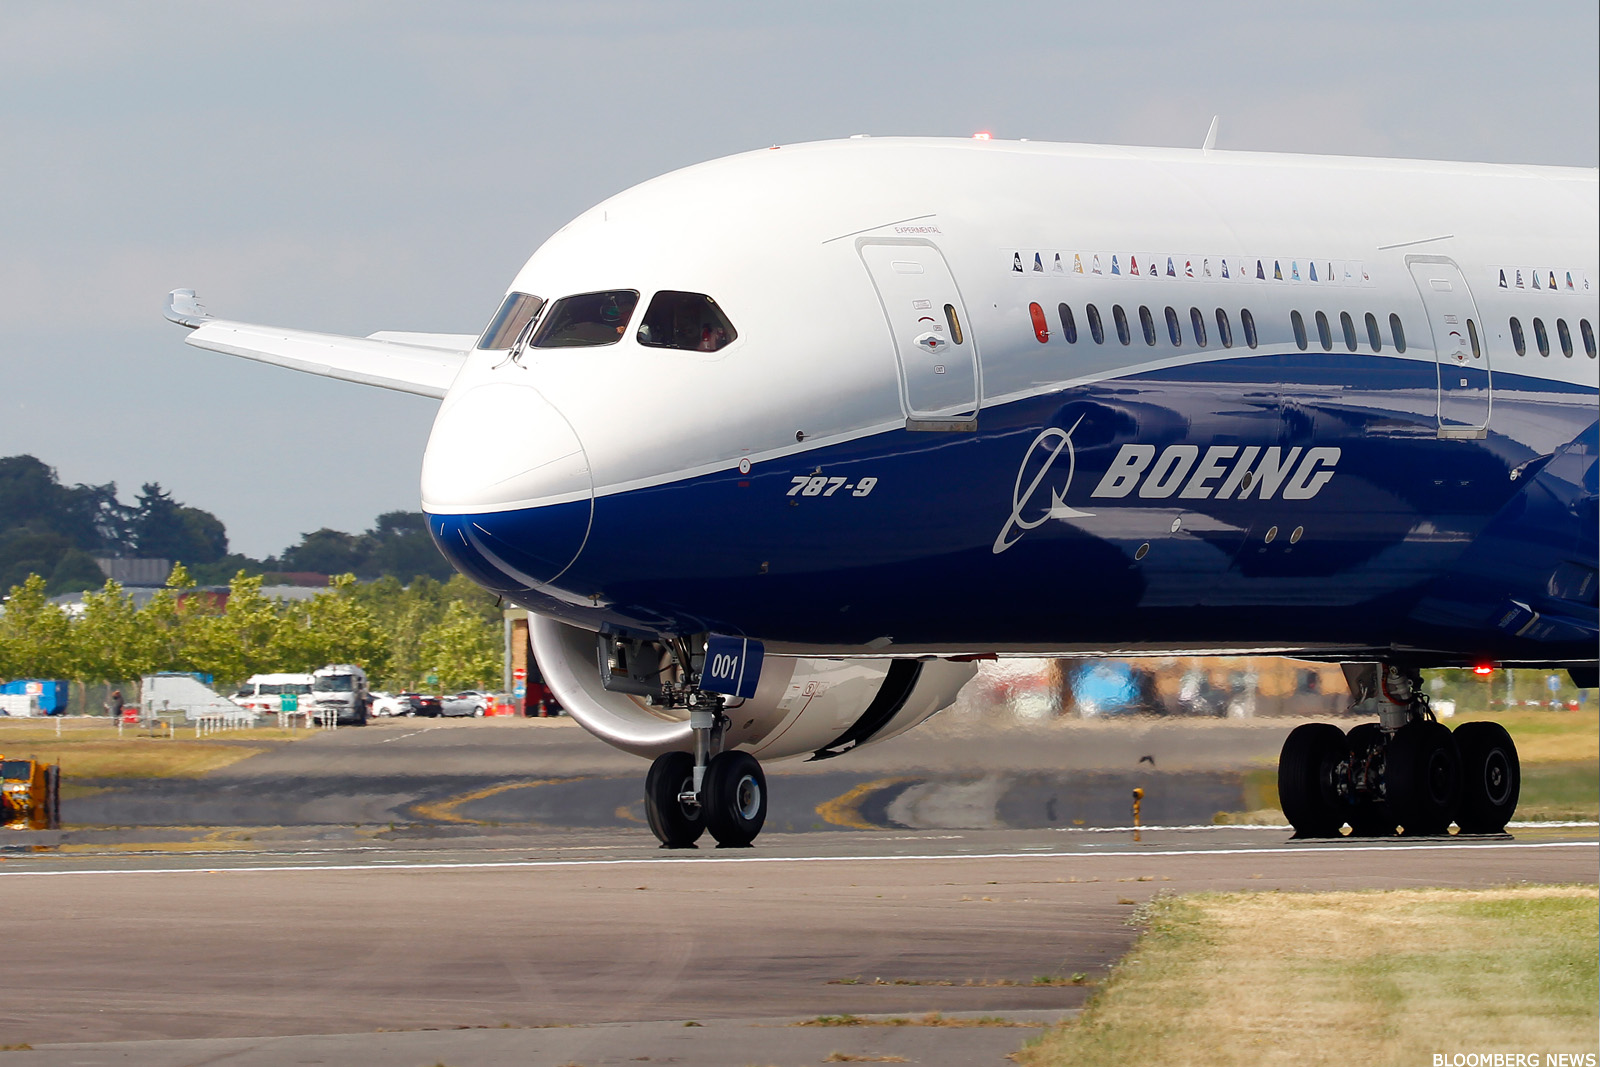 Boeing (BA) Stock Up, Credit Suisse: 777 Production Cuts Coming - TheStreet1600 x 1067